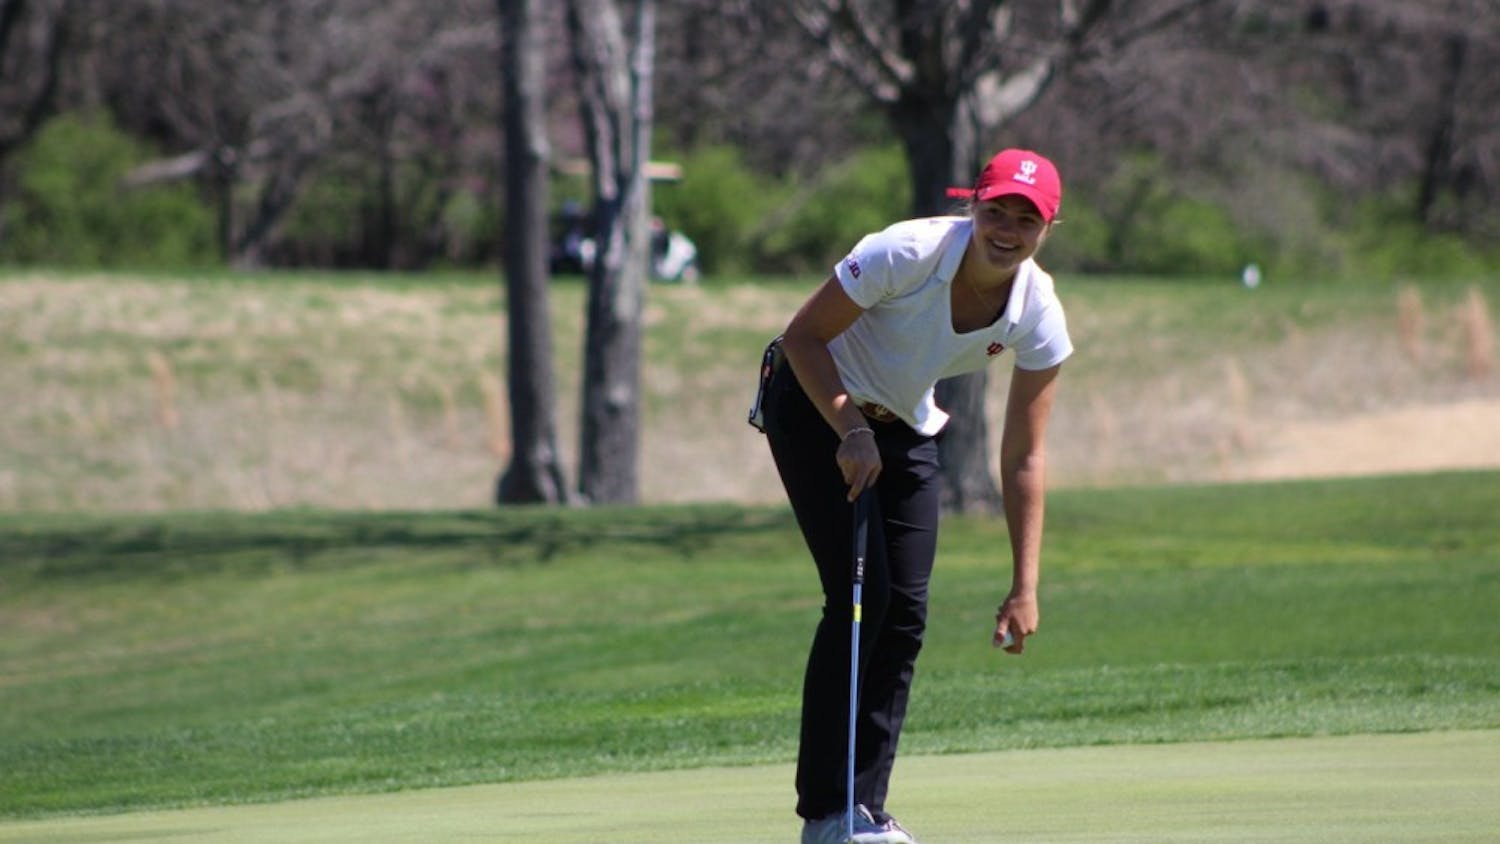 Freshman Emma Fisher picks her ball out of the hole after sinking a putt on Saturday, April 8, 2017 during the IU Invitational at the IU Golf Course. Fisher won the 95th Women's State Amateur Championship at the Rock Hollow Golf Club in Peru, Ind on Friday with a score of +4.